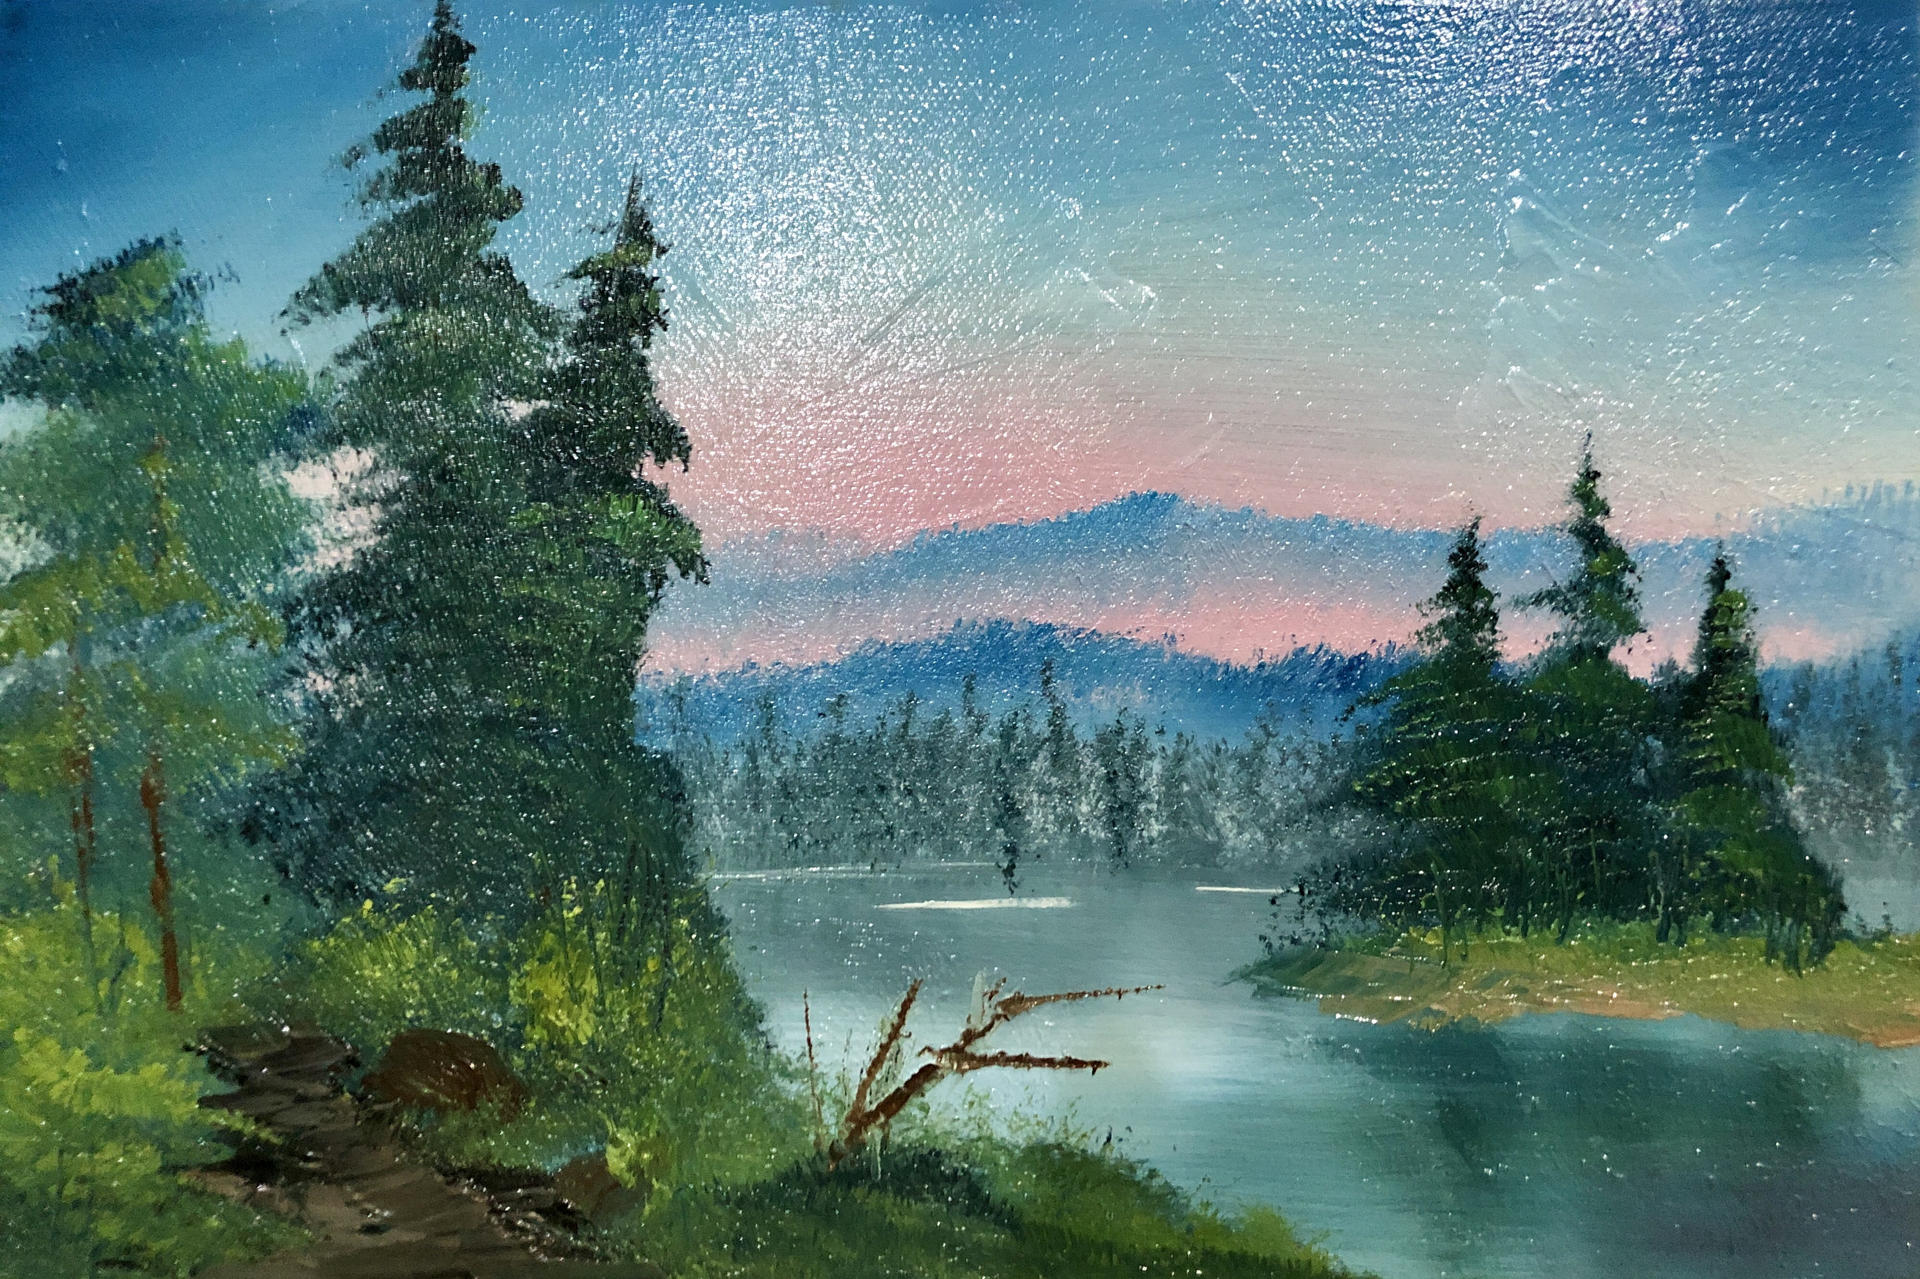 Bob Ross Style Landscape Paintings by Tryintogetthere on DeviantArt